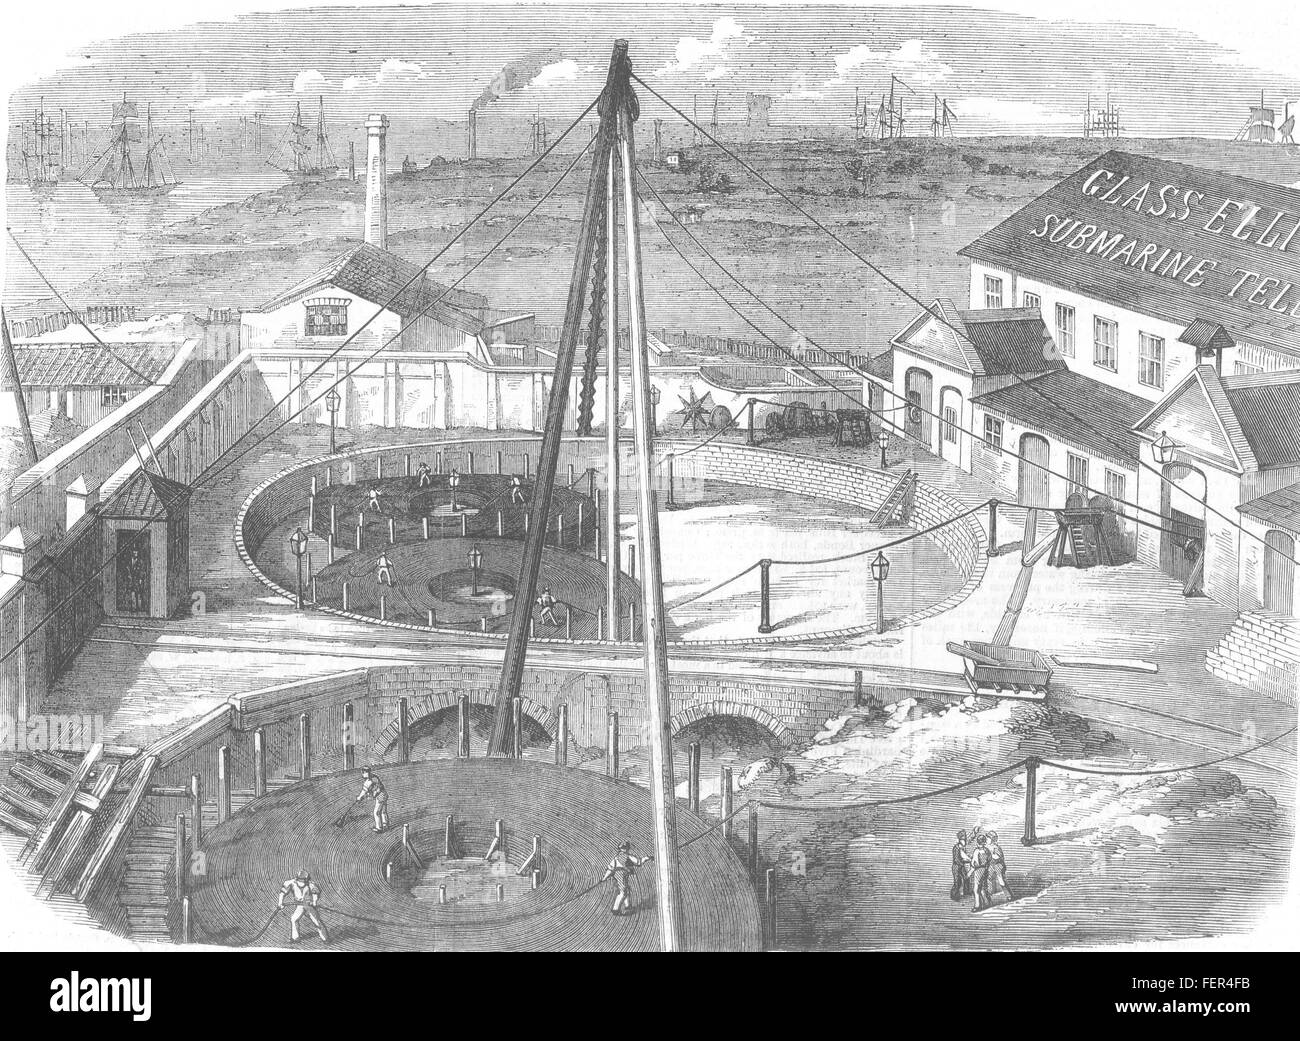 GREENWICH Transatlantic Telegraph Cable ready for shipment at Morden Wharf 1857. Illustrated London News Stock Photo